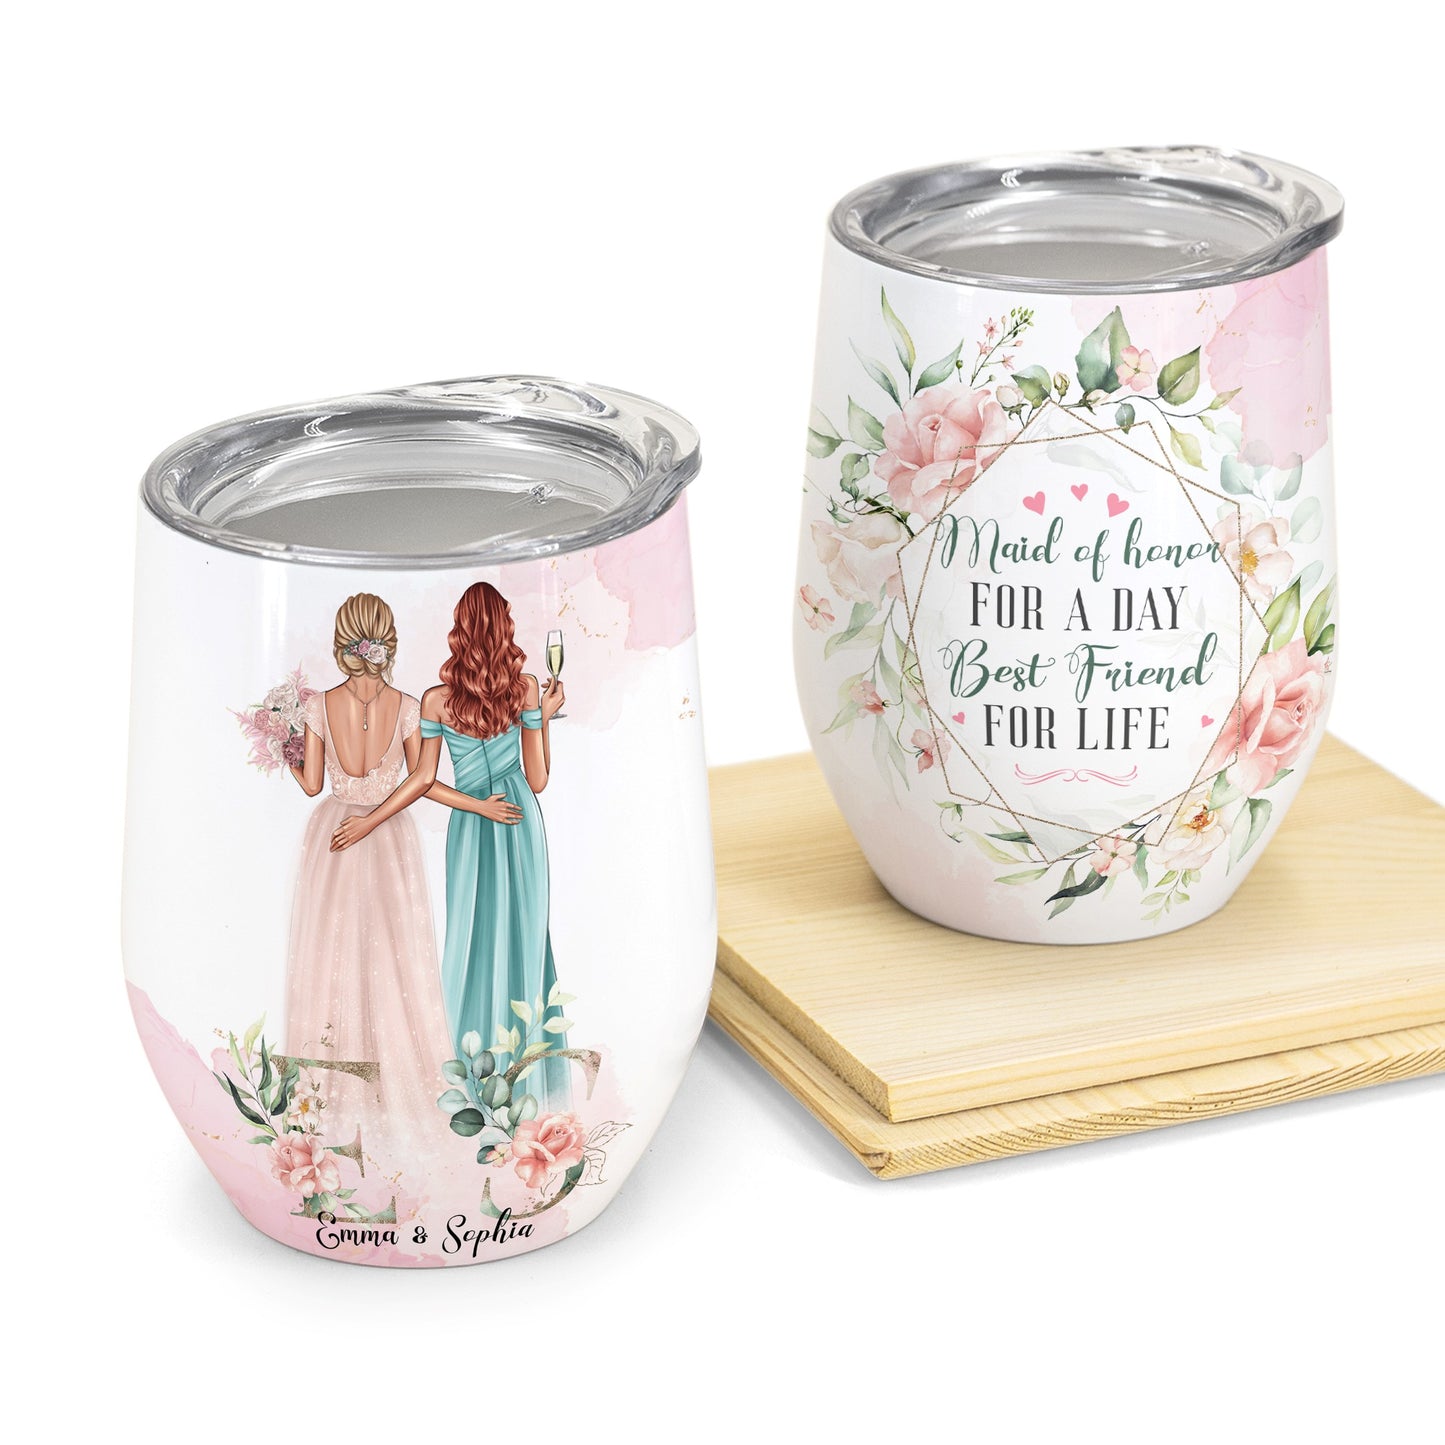 Maid Of Honor For A Day - Personalized Monogram Wine Tumbler - Birthday Gift Wedding Gift For Maid Of Honor, Bridesmaid